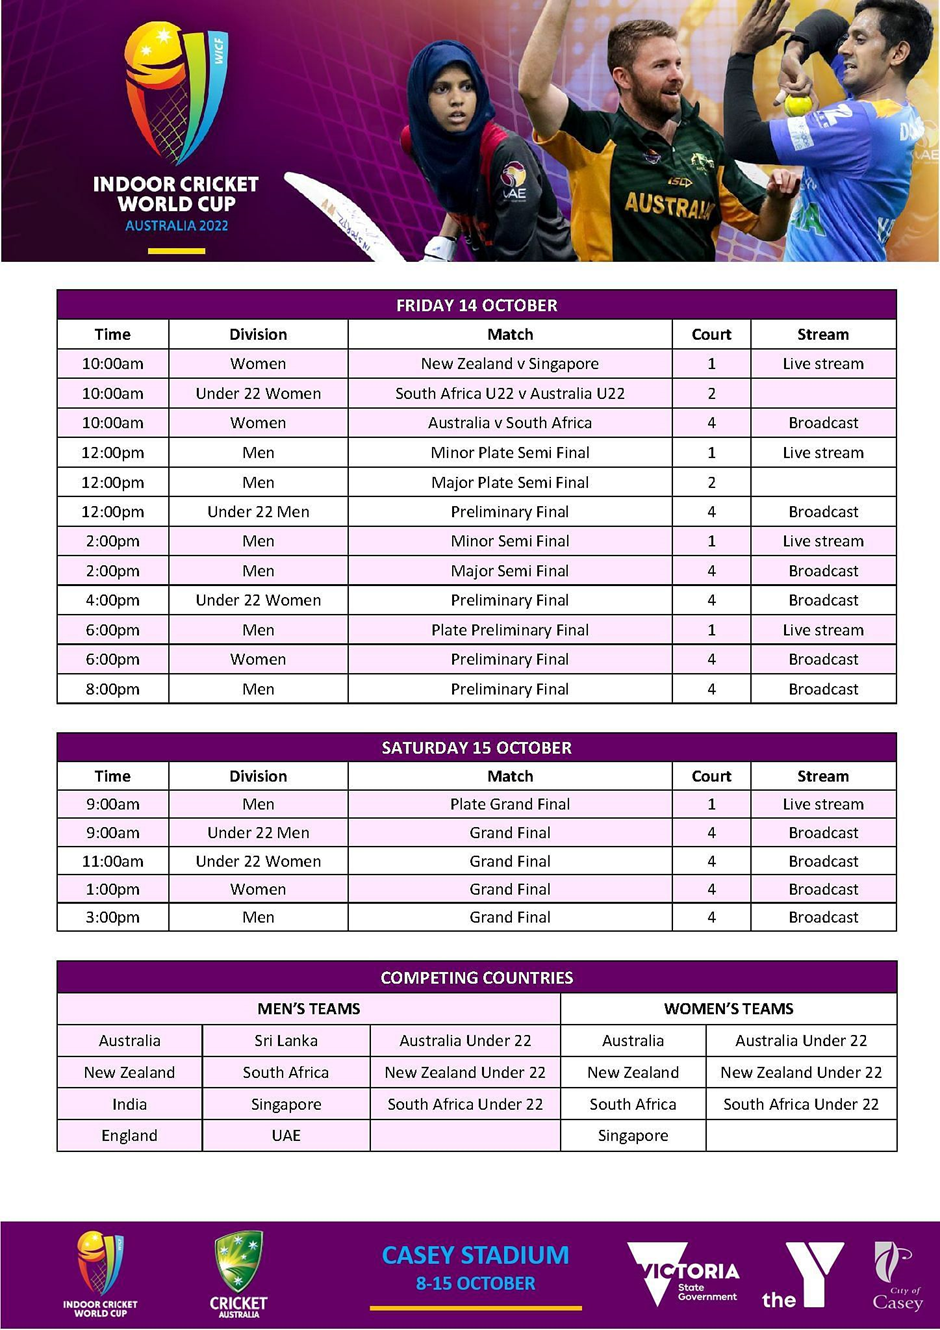 Indoor Cricket News 2022 World Cup Fixtures Released, Teams and Format Confirmed, 43 Matches to be Broadcast Live